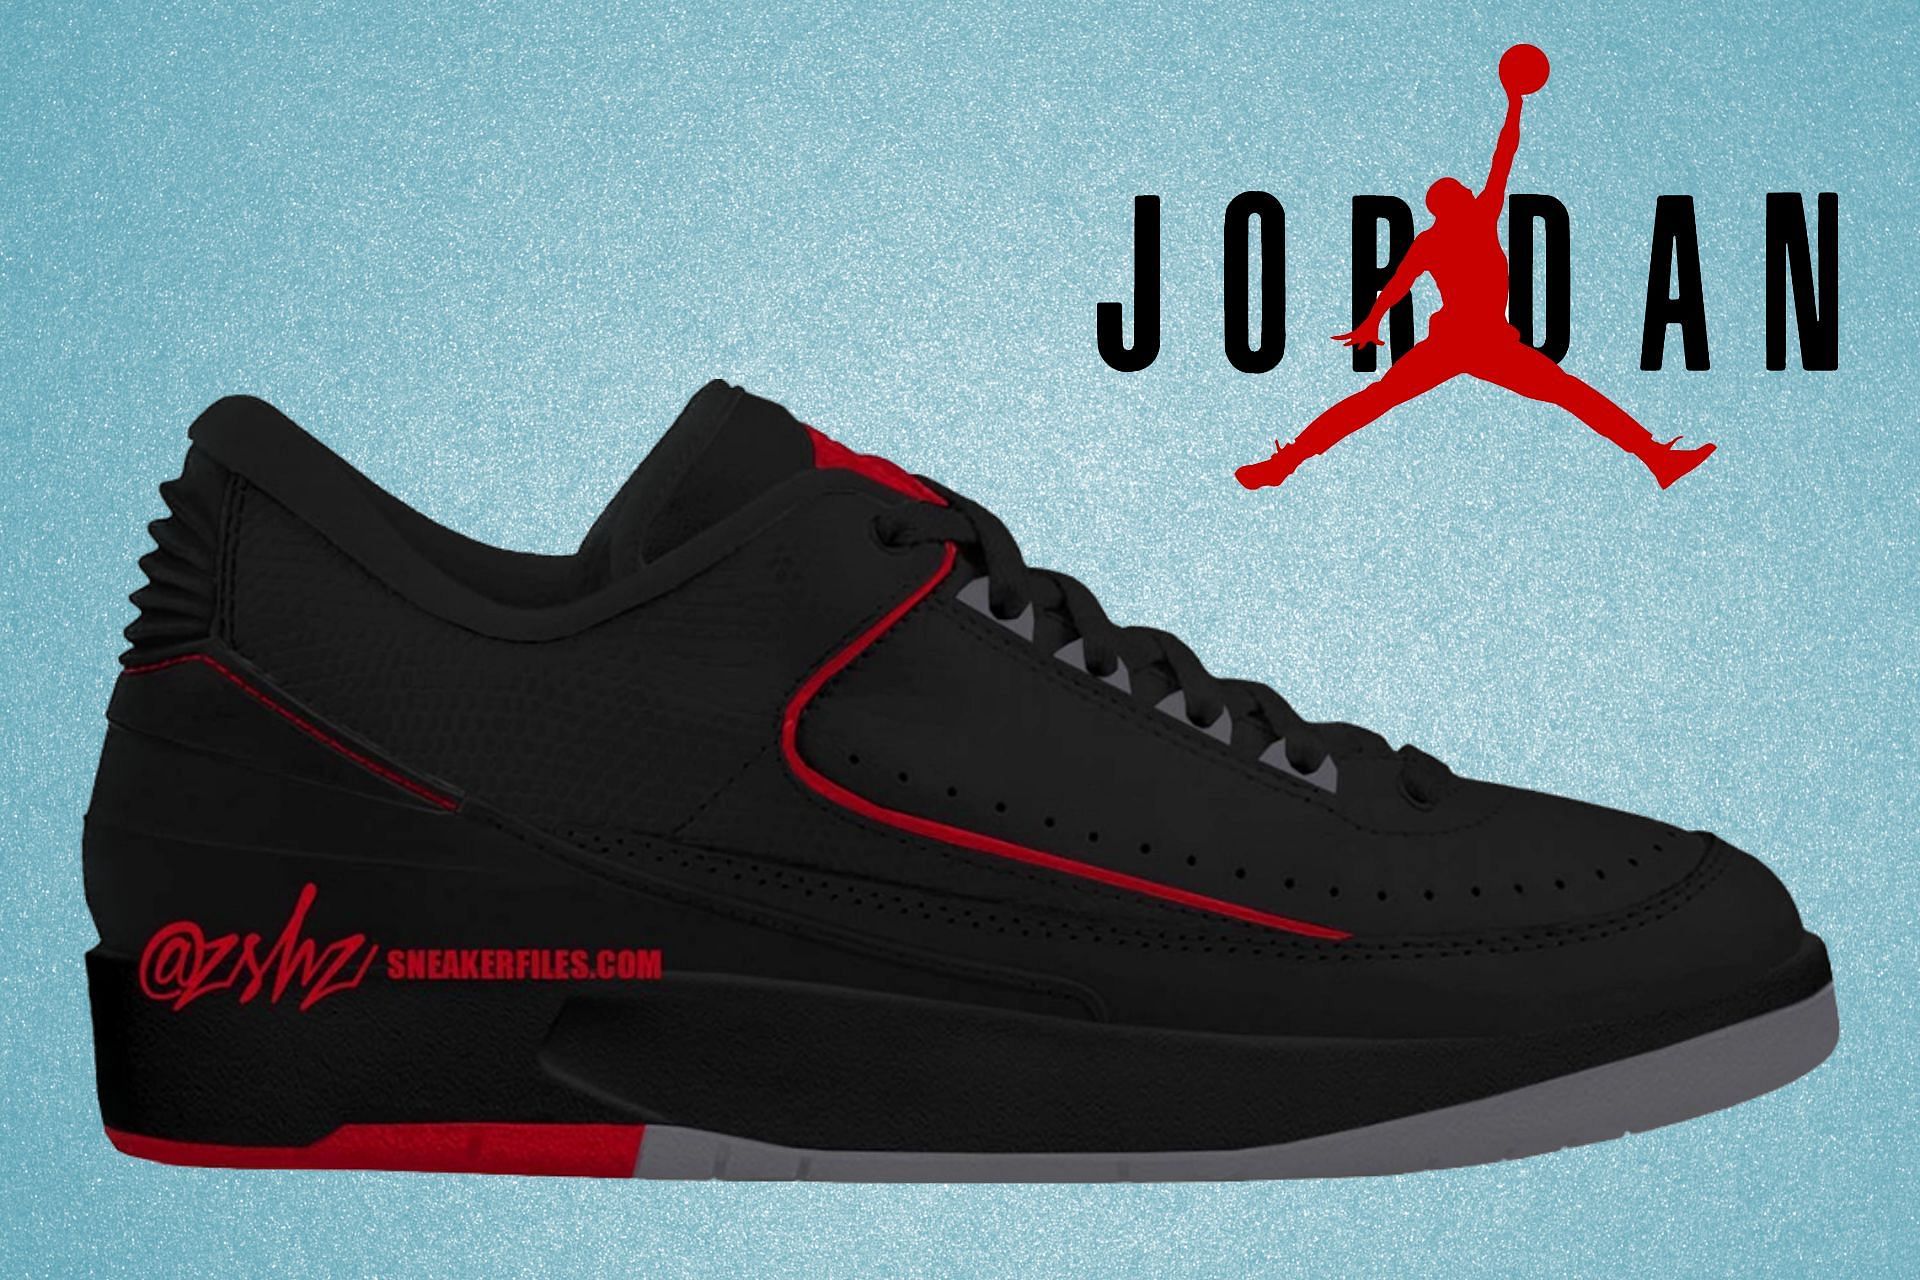 Nike: Nike Air Jordan Low shoes: Where to buy, price, and details explored